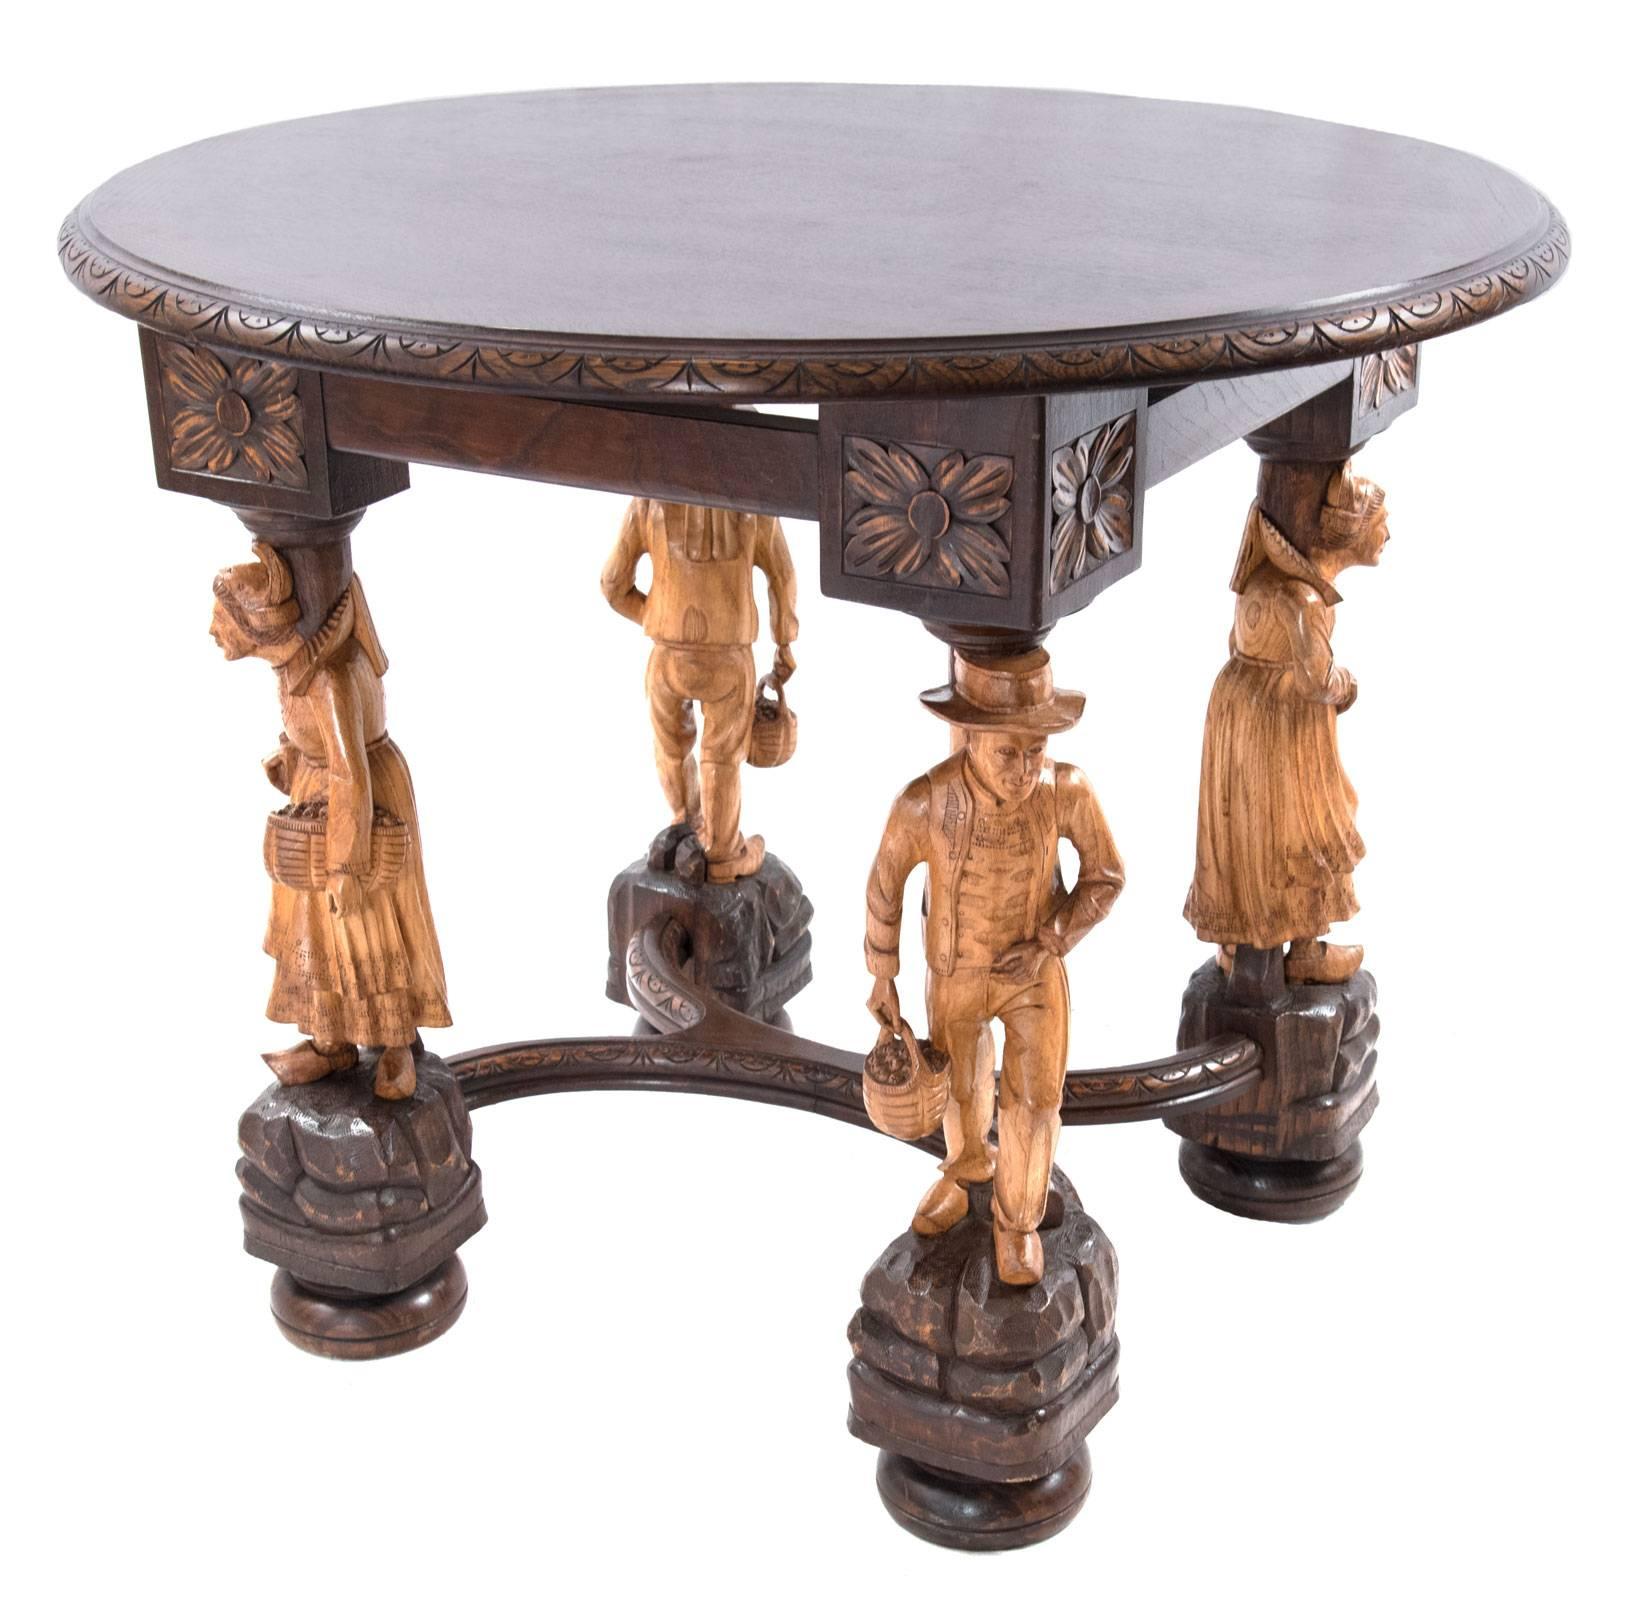 Aesthetic Movement 19th Century French Gueridon Table with Carved Figural Legs For Sale